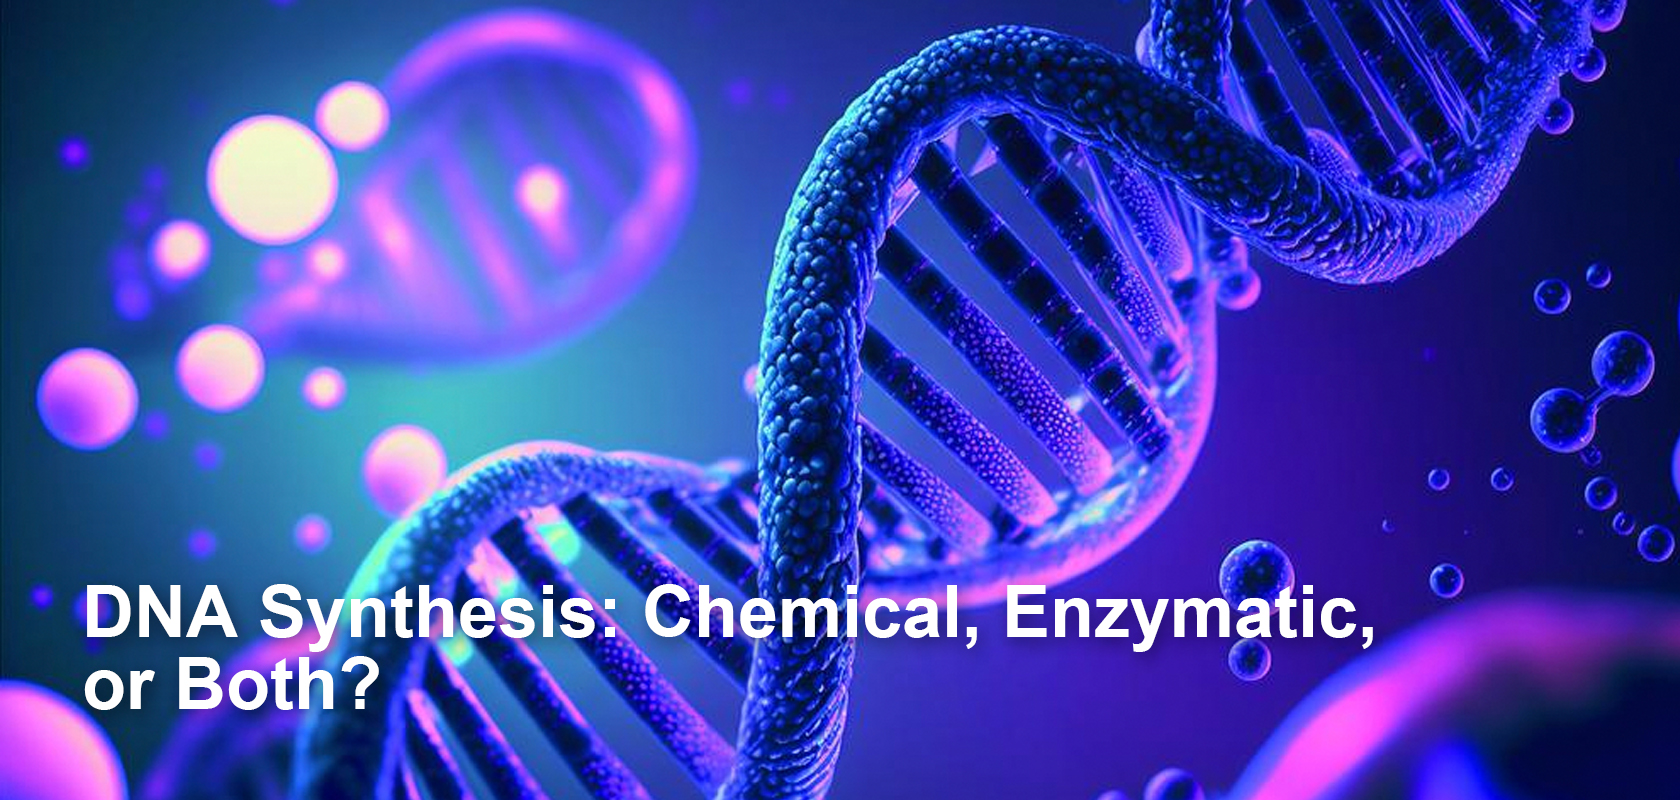 DNA Synthesis: Chemical, Enzymatic, or Both?